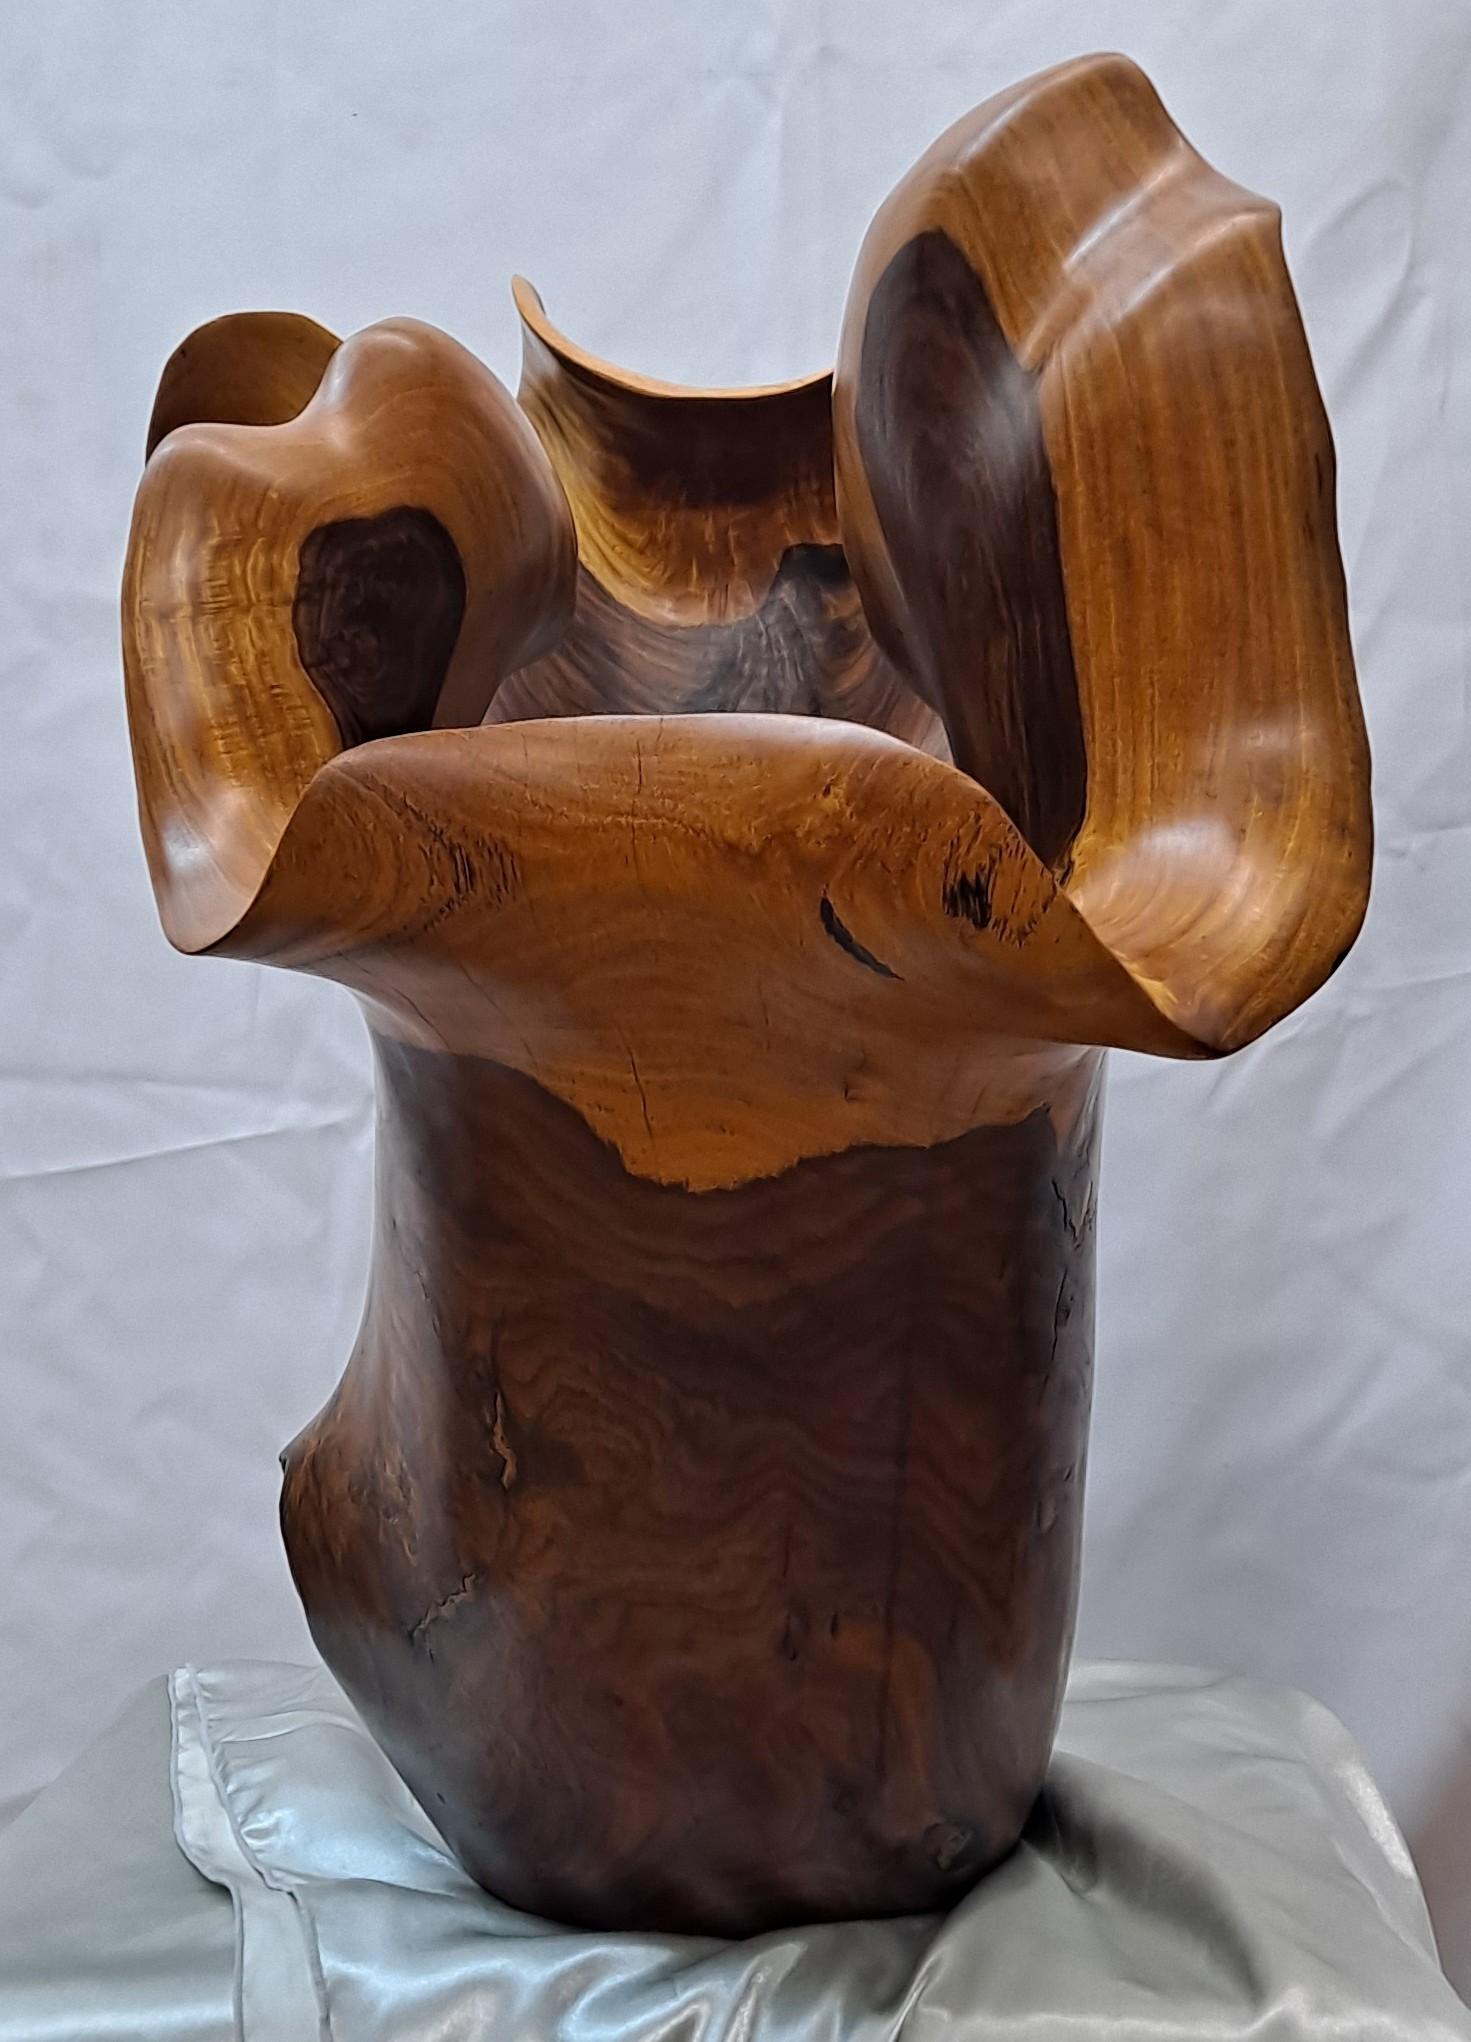 Beautiful Carred Rosewood Sculpture Center Piece by Souphom Manikhong

Signed Phom and dated 7/07

26.5 W x 16 D x 18 H